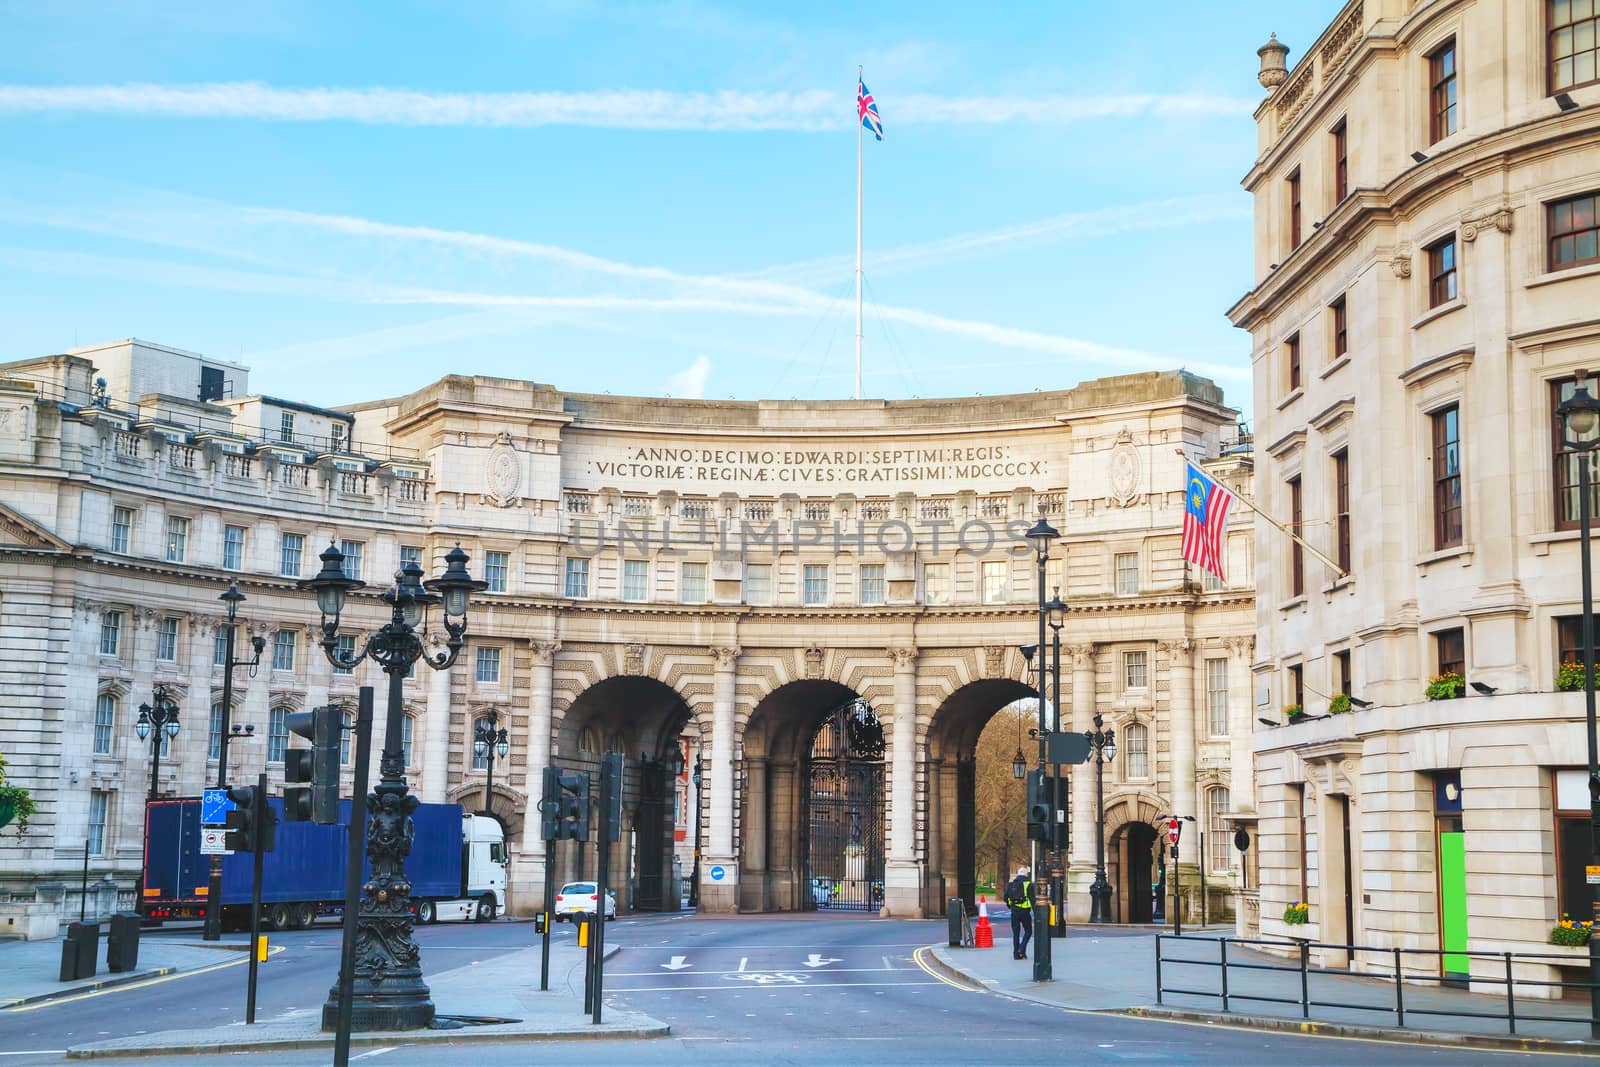 Admiralty Arch near Trafalgar Square in London by AndreyKr